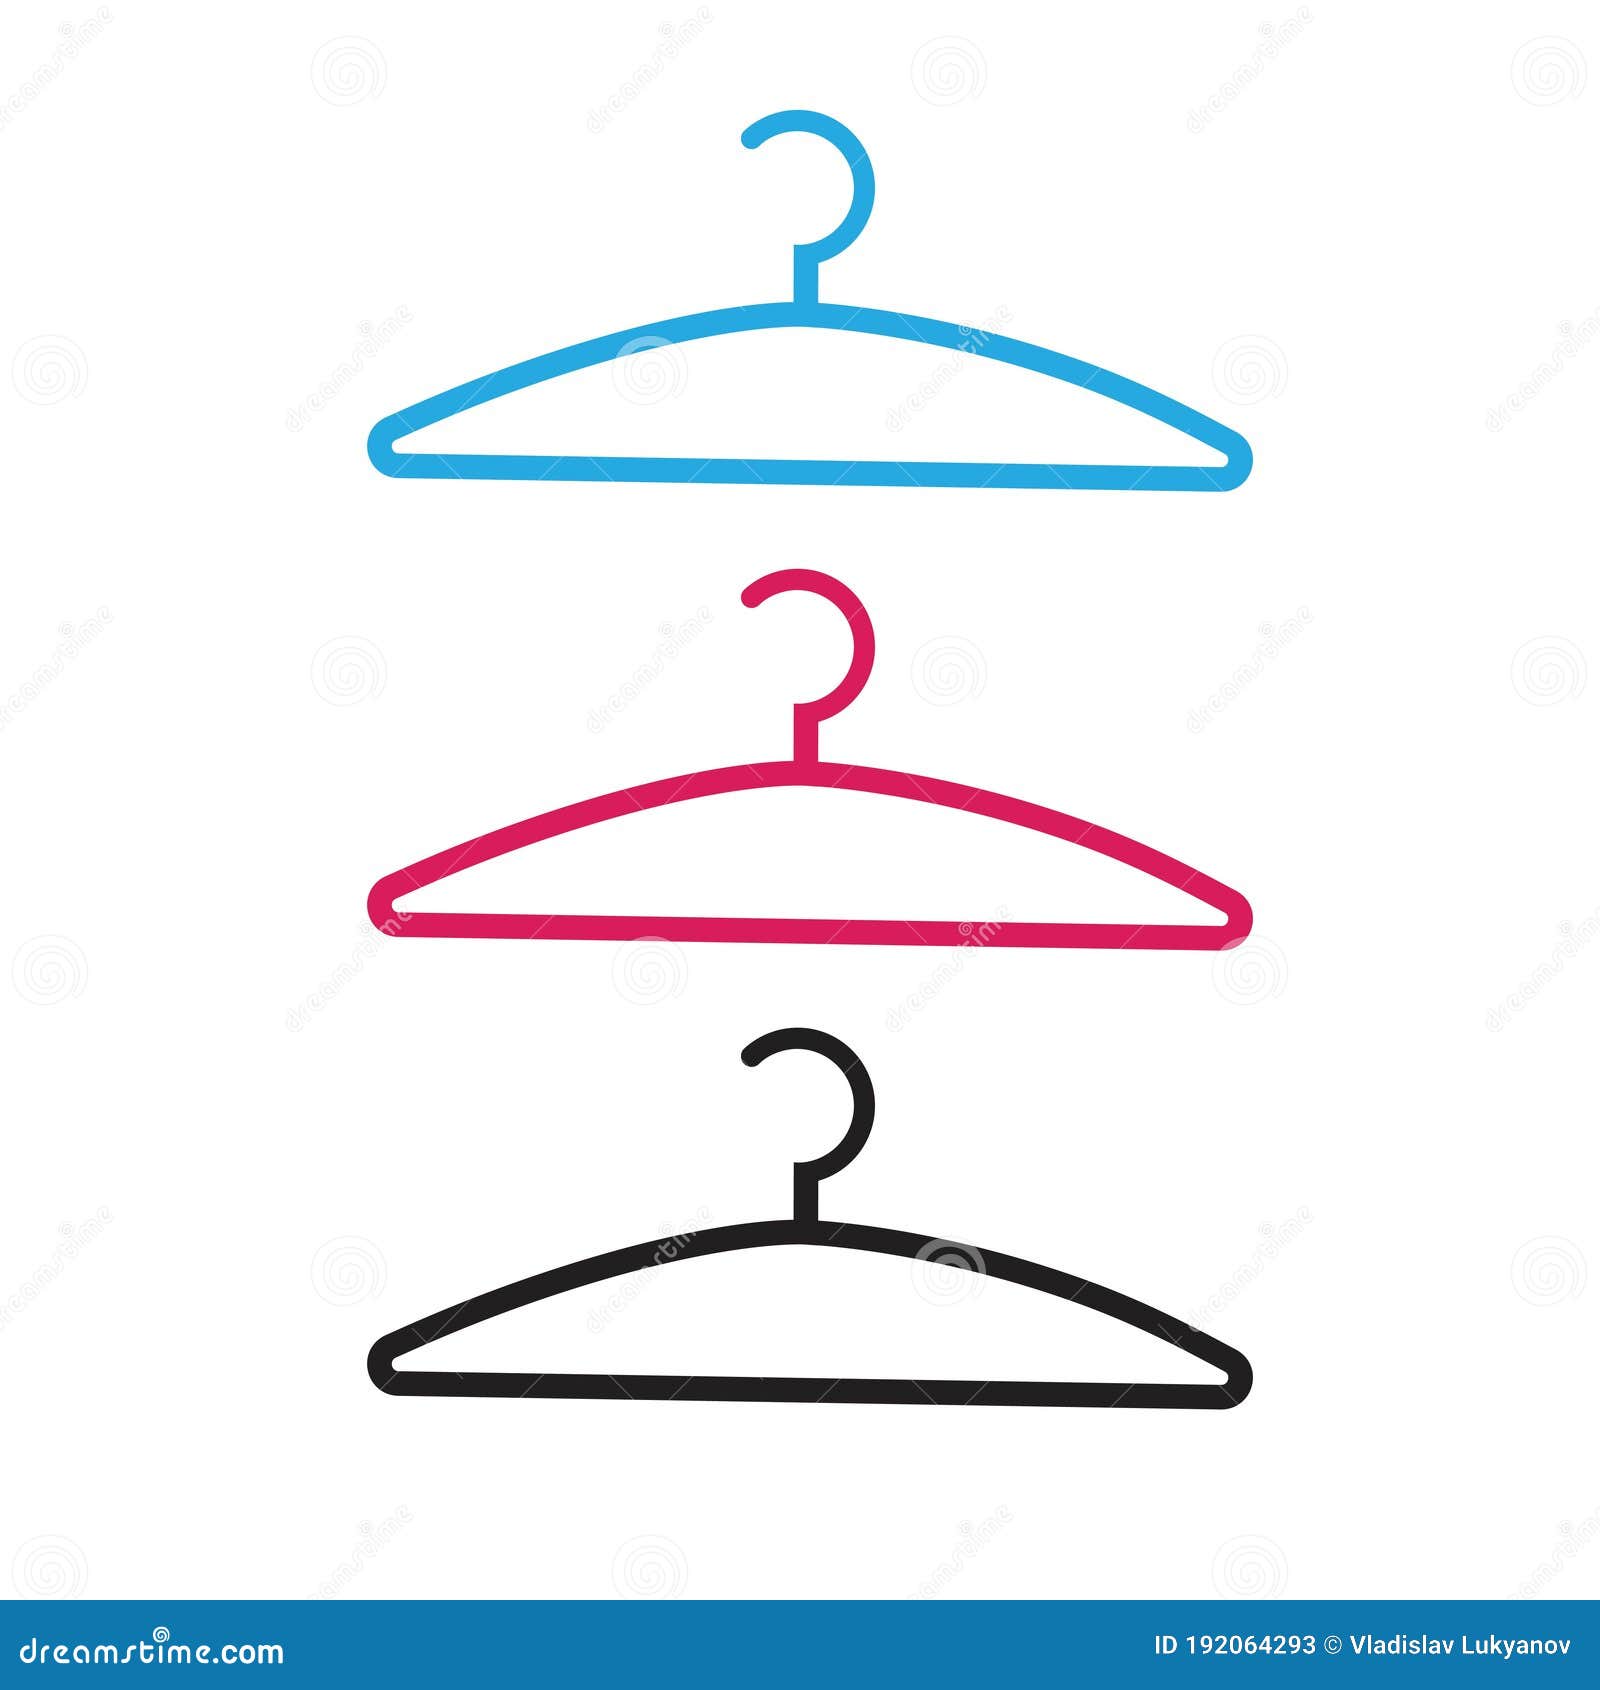 Get the product you want Clothes Hanger Vector Icon Hanger Isolated Vector  Illustration On, clothes hangers 